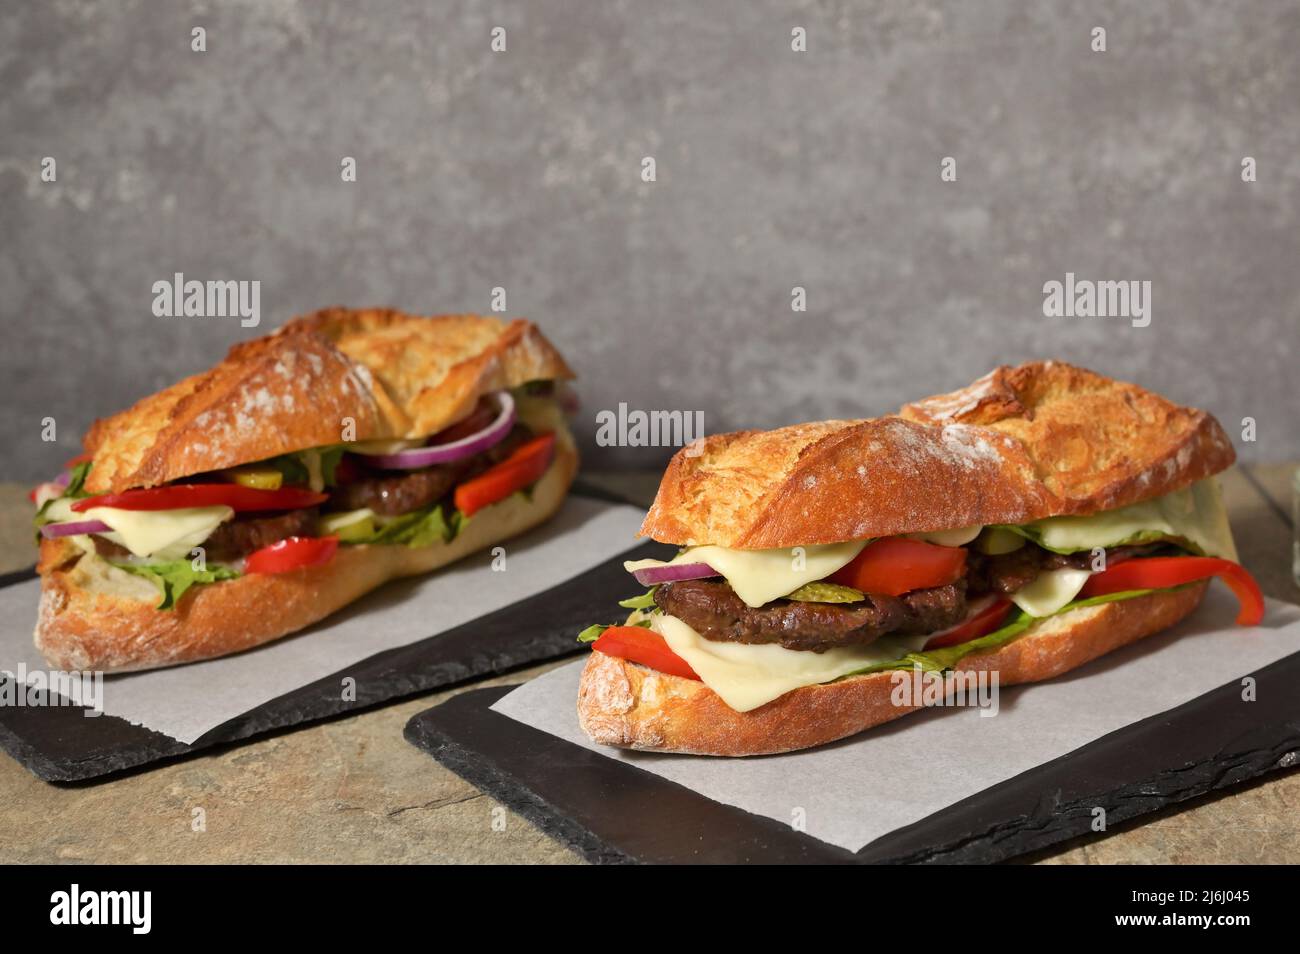 Homemade Burger with Baguette Bread on the wooden table Stock Photo